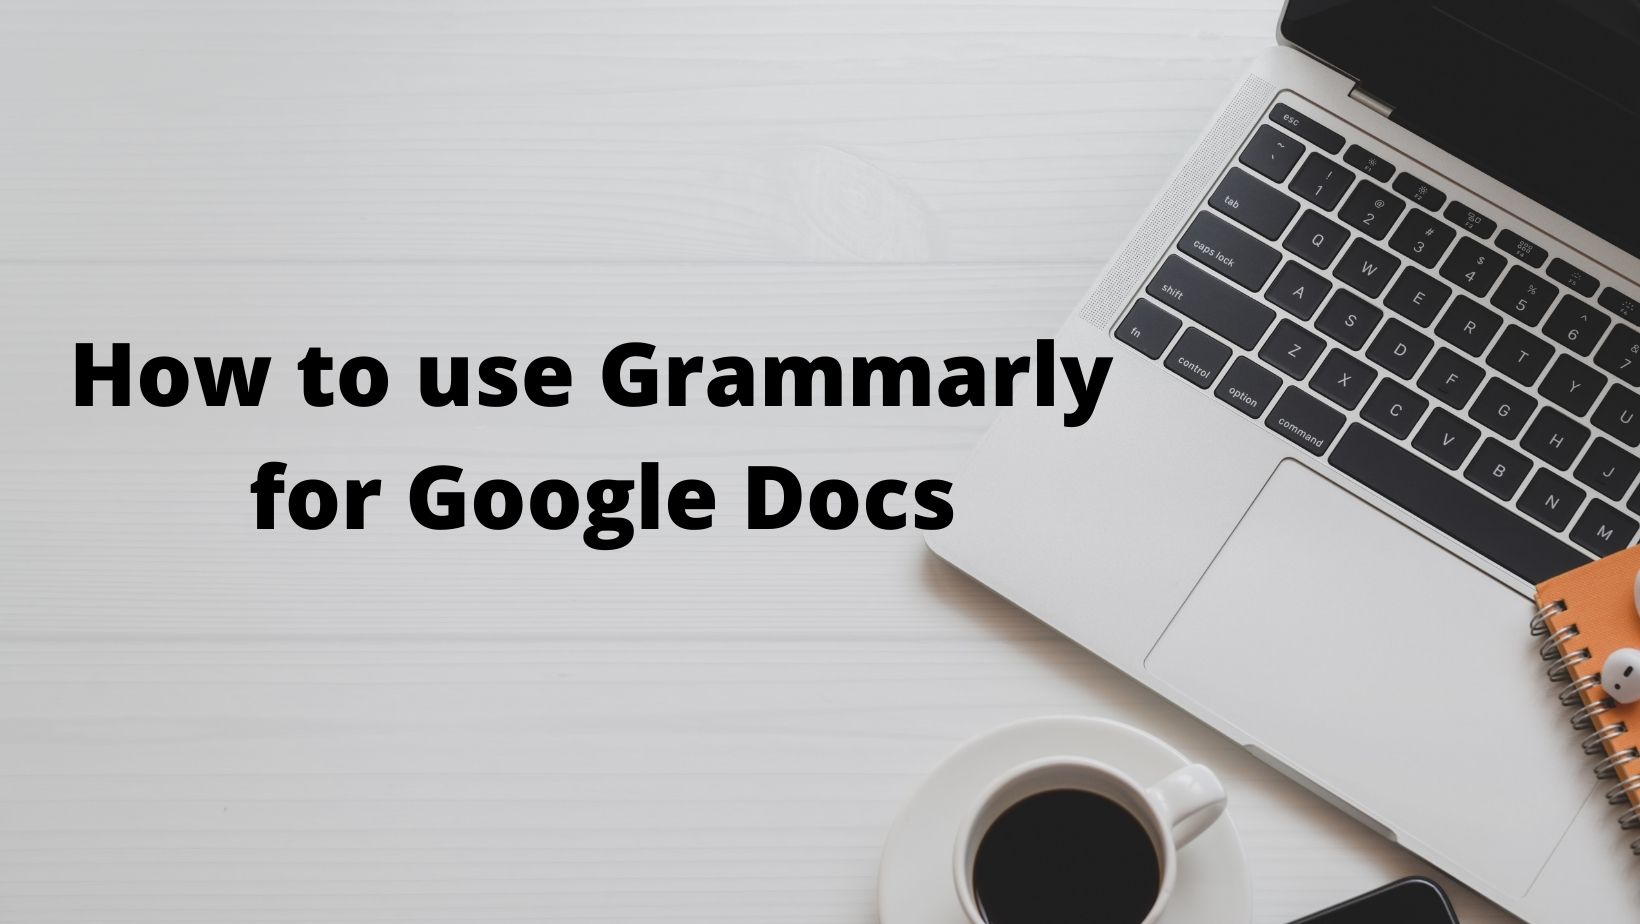 How to Use Grammarly for Google Docs?